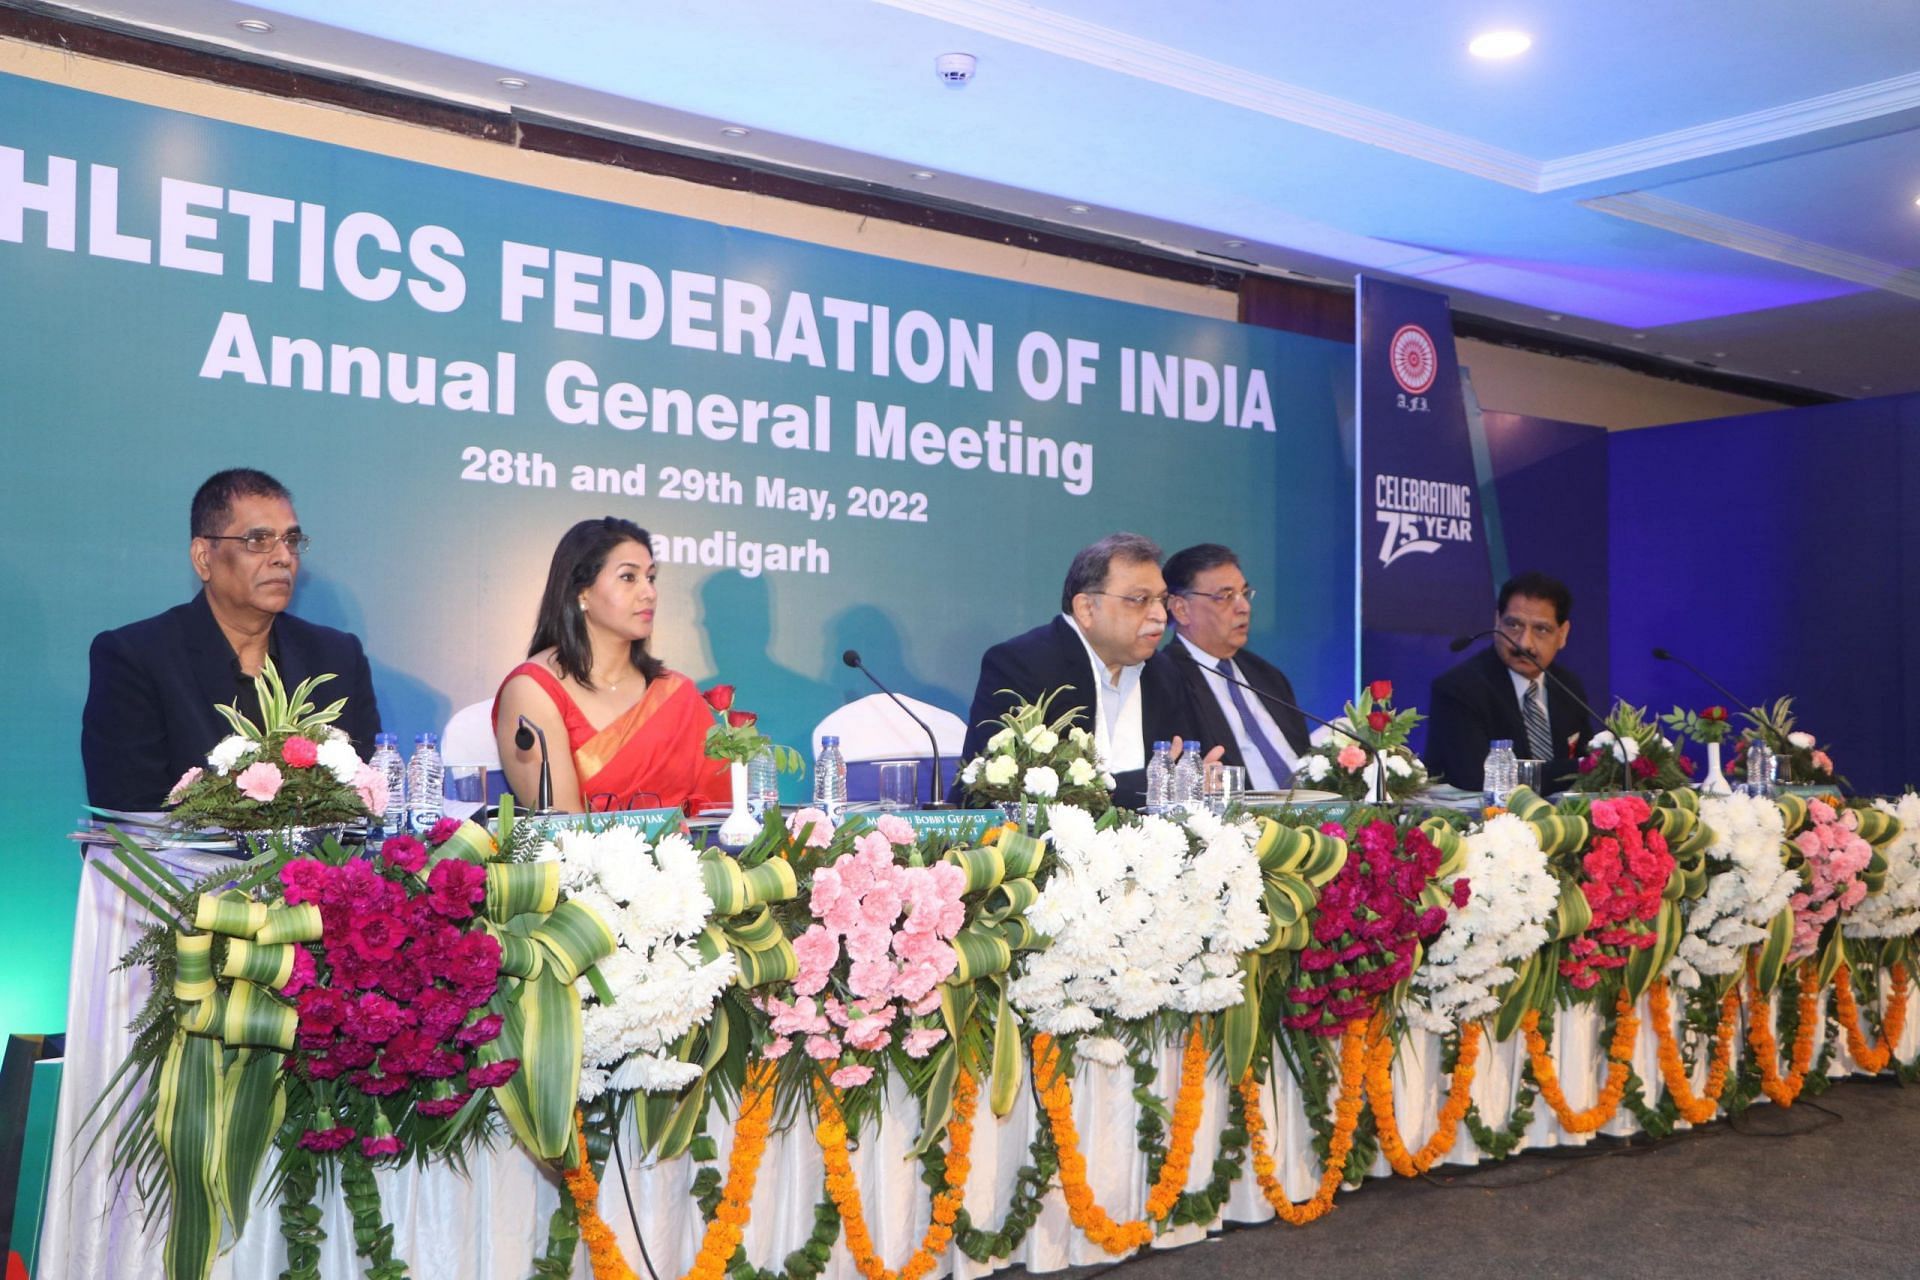 Annual General Meeting of Athletics Federation of India held at Chandigarh